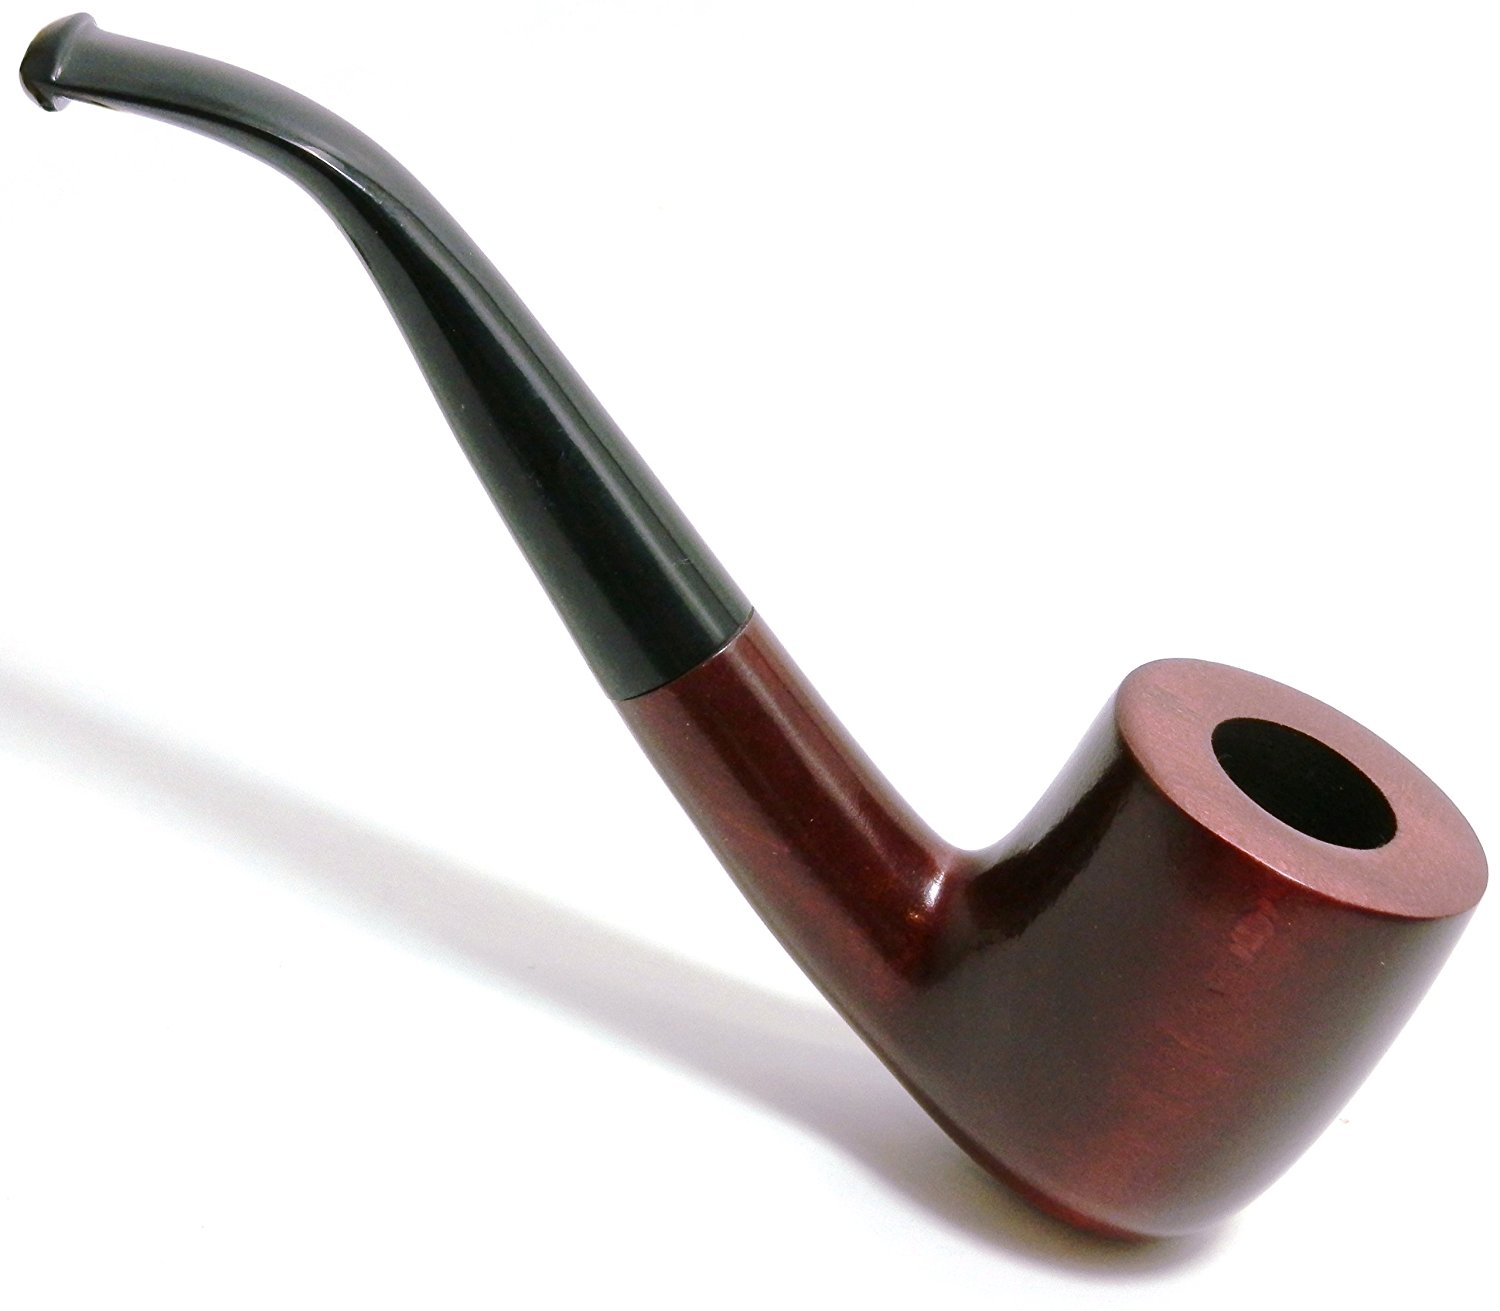 Amazon.com: Smoking Pipe - Old Boy No 38 - Pear Wood Root - Hand ...